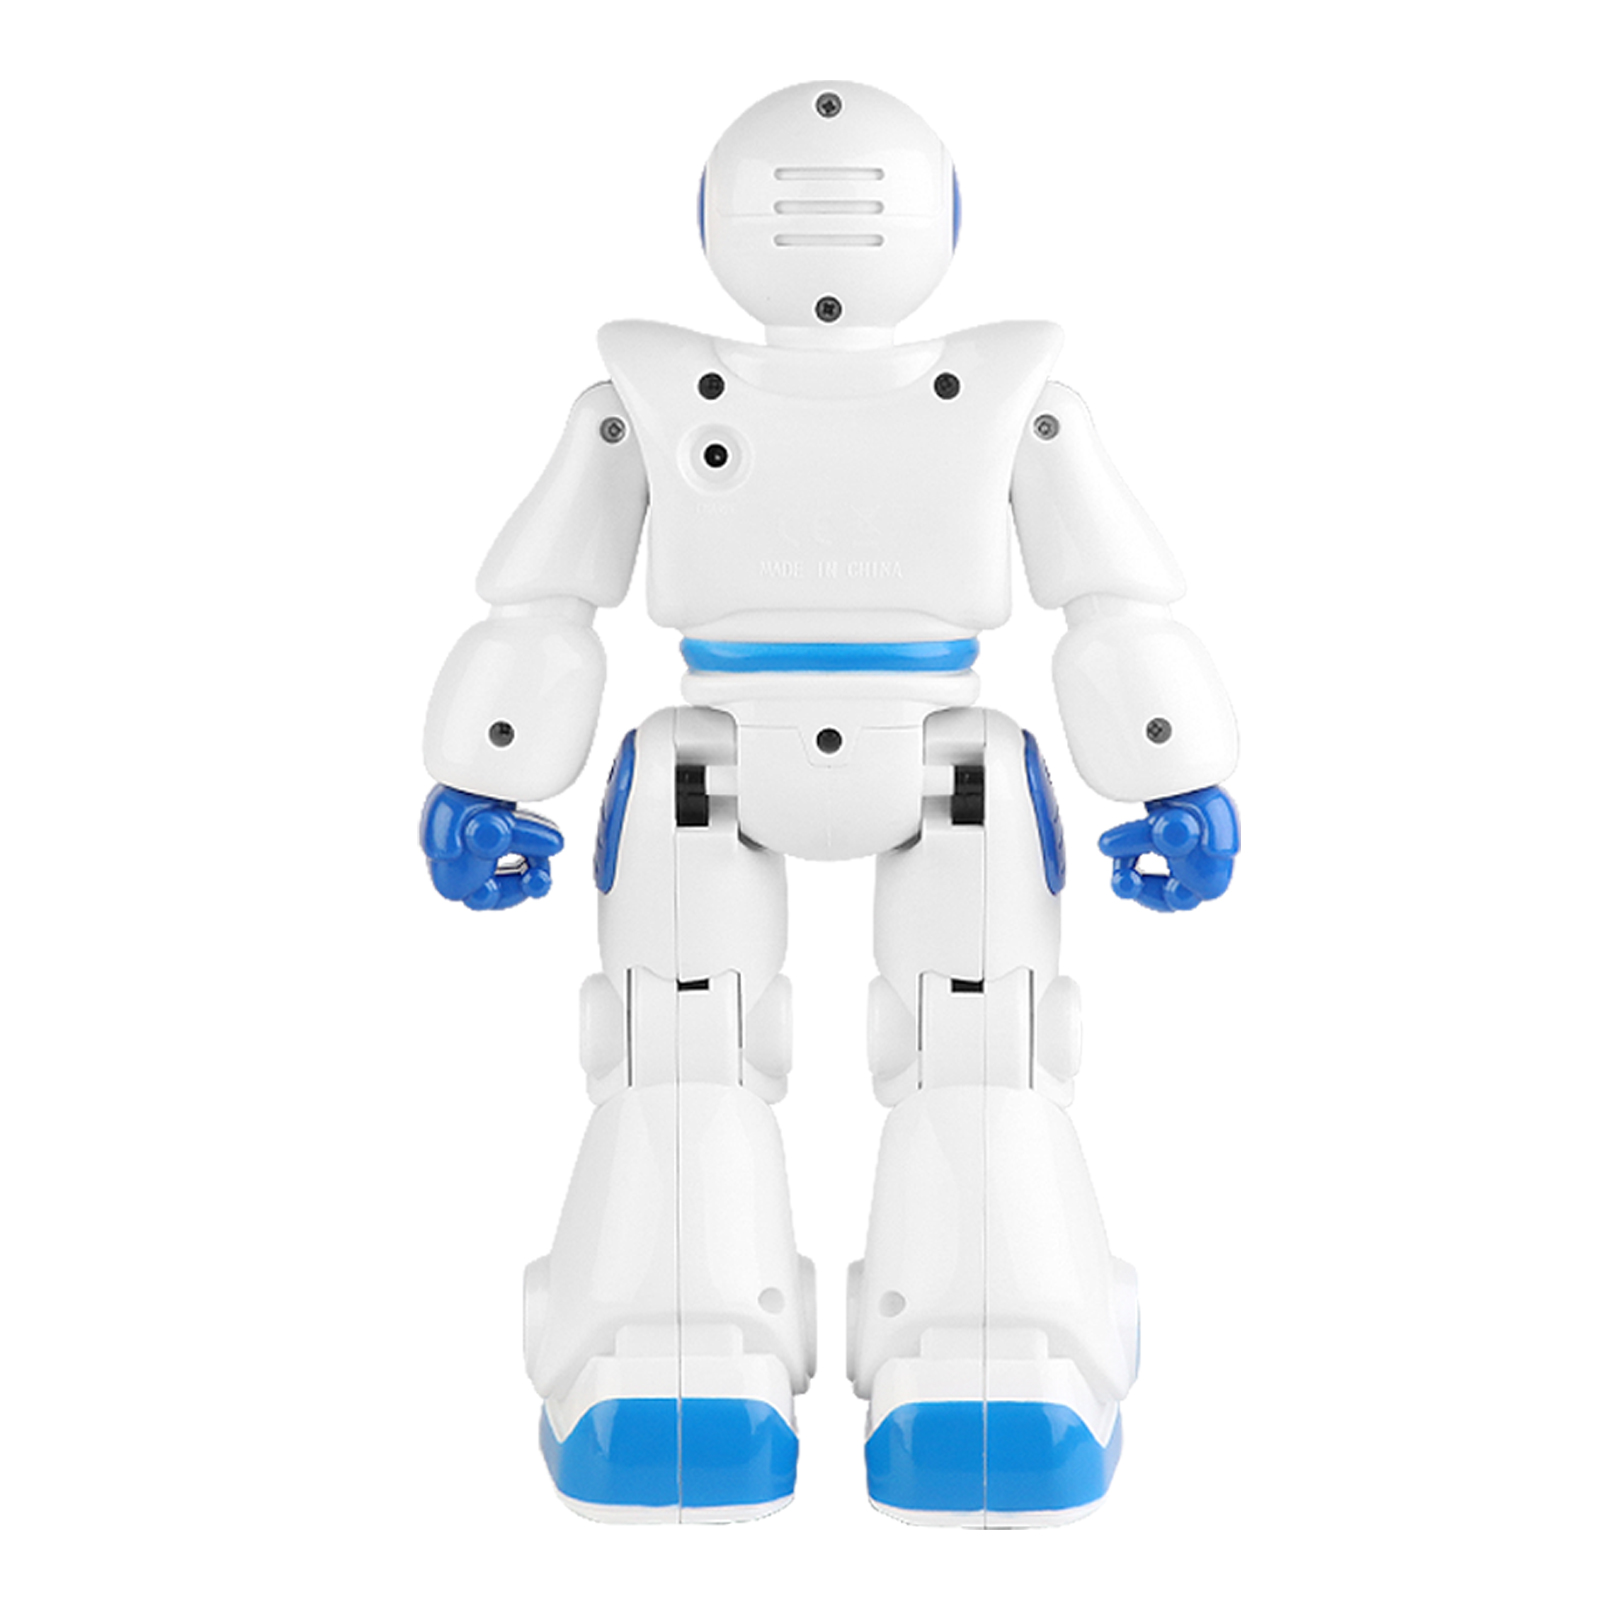 Dcenta Smart Intelligent Robot Toy (Blue and White) - image 5 of 7